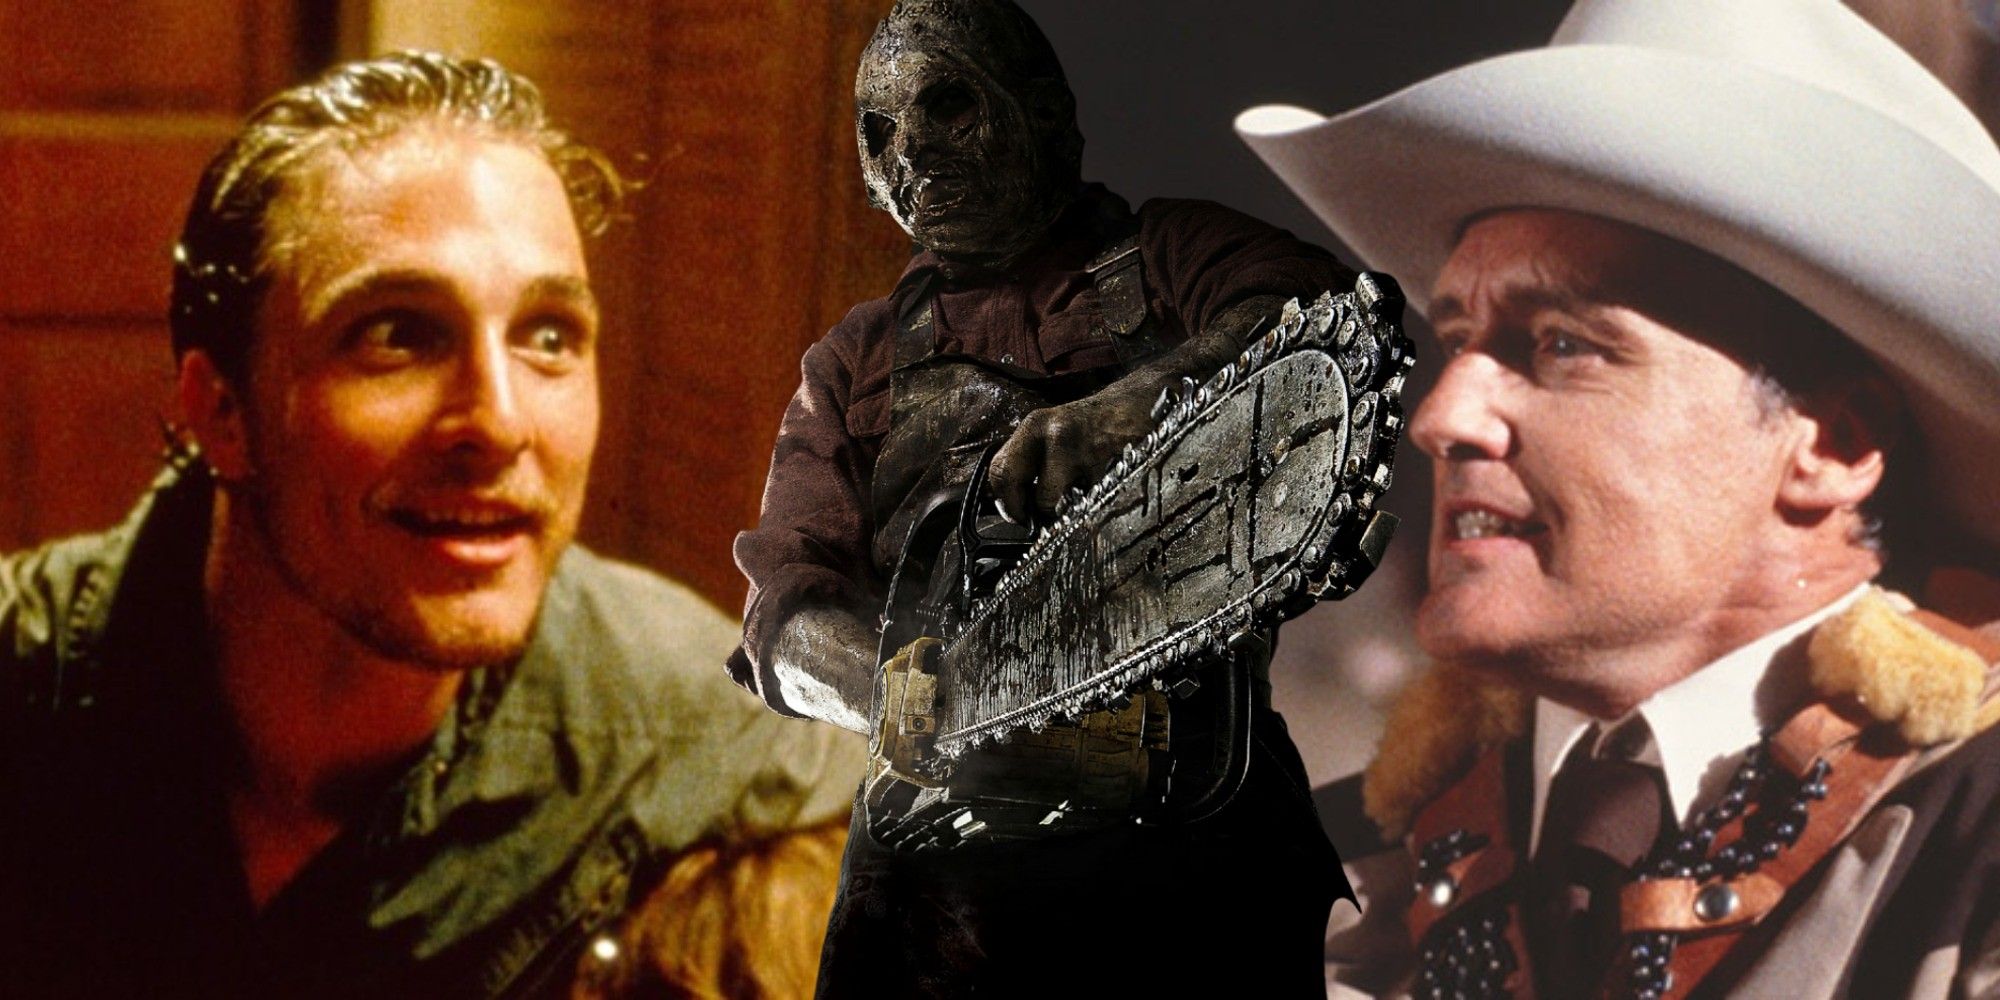 Split image of Matthew McConaughey, Leatherface and Dennis Hopper from Texas Chainsaw Massacre movies